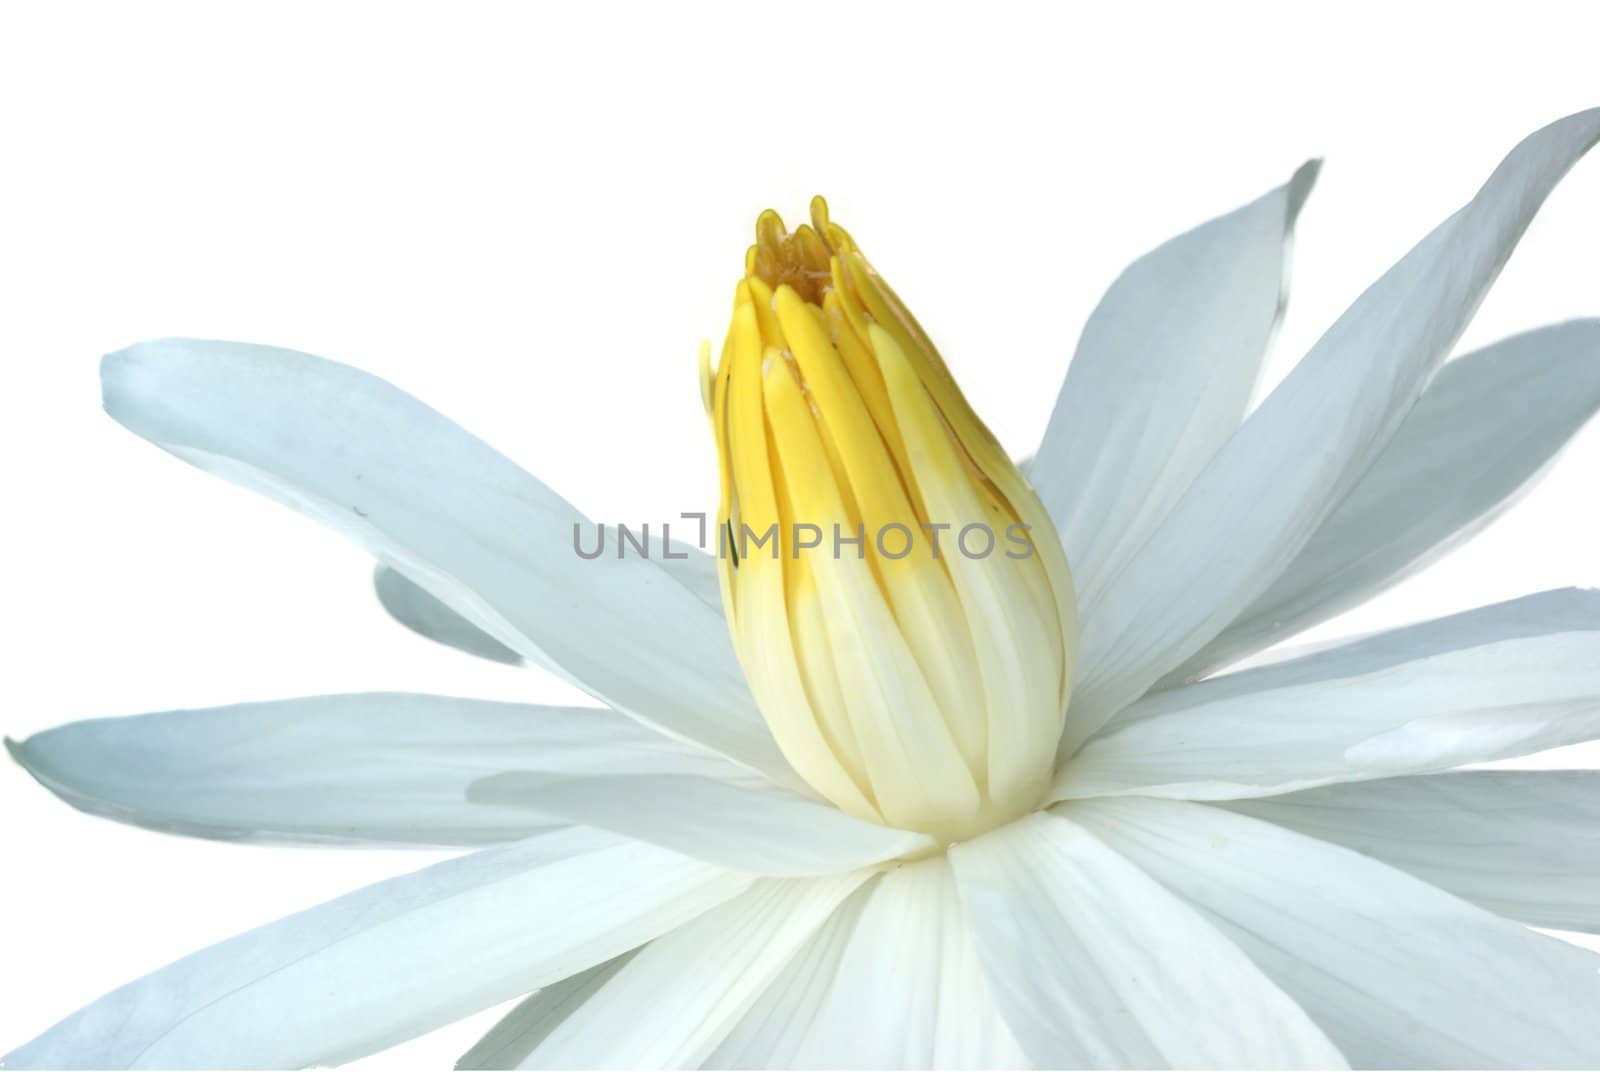 White water lily was isolated on white background